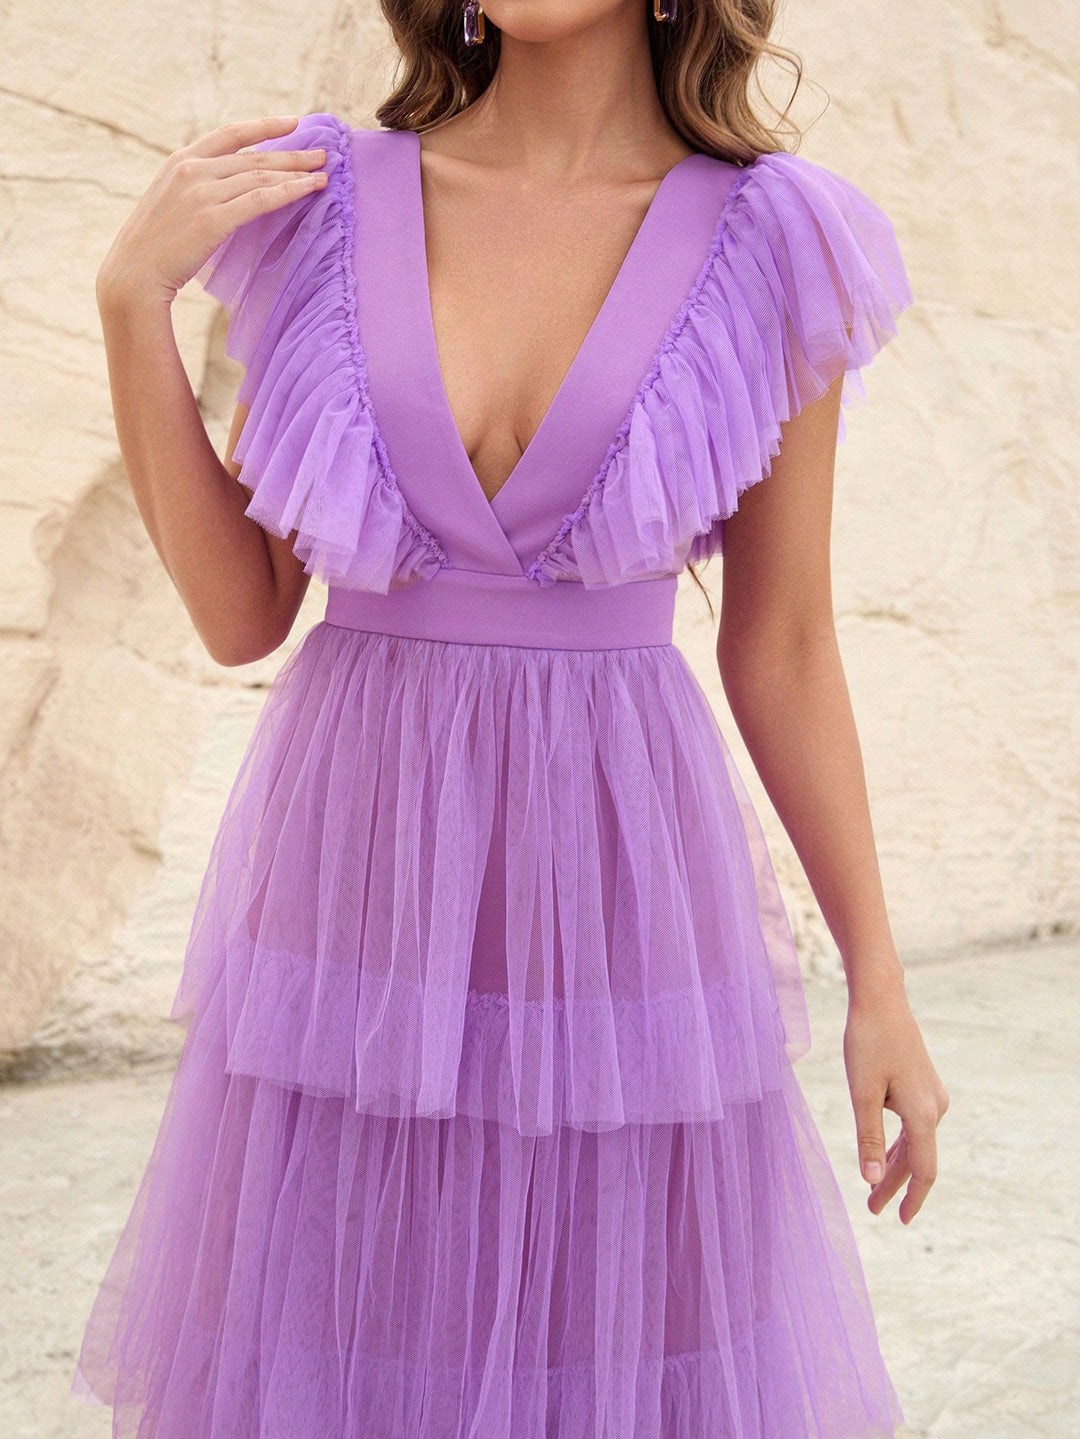 Plunging Neck Backless Ruffle Trim Mesh A Line Dress